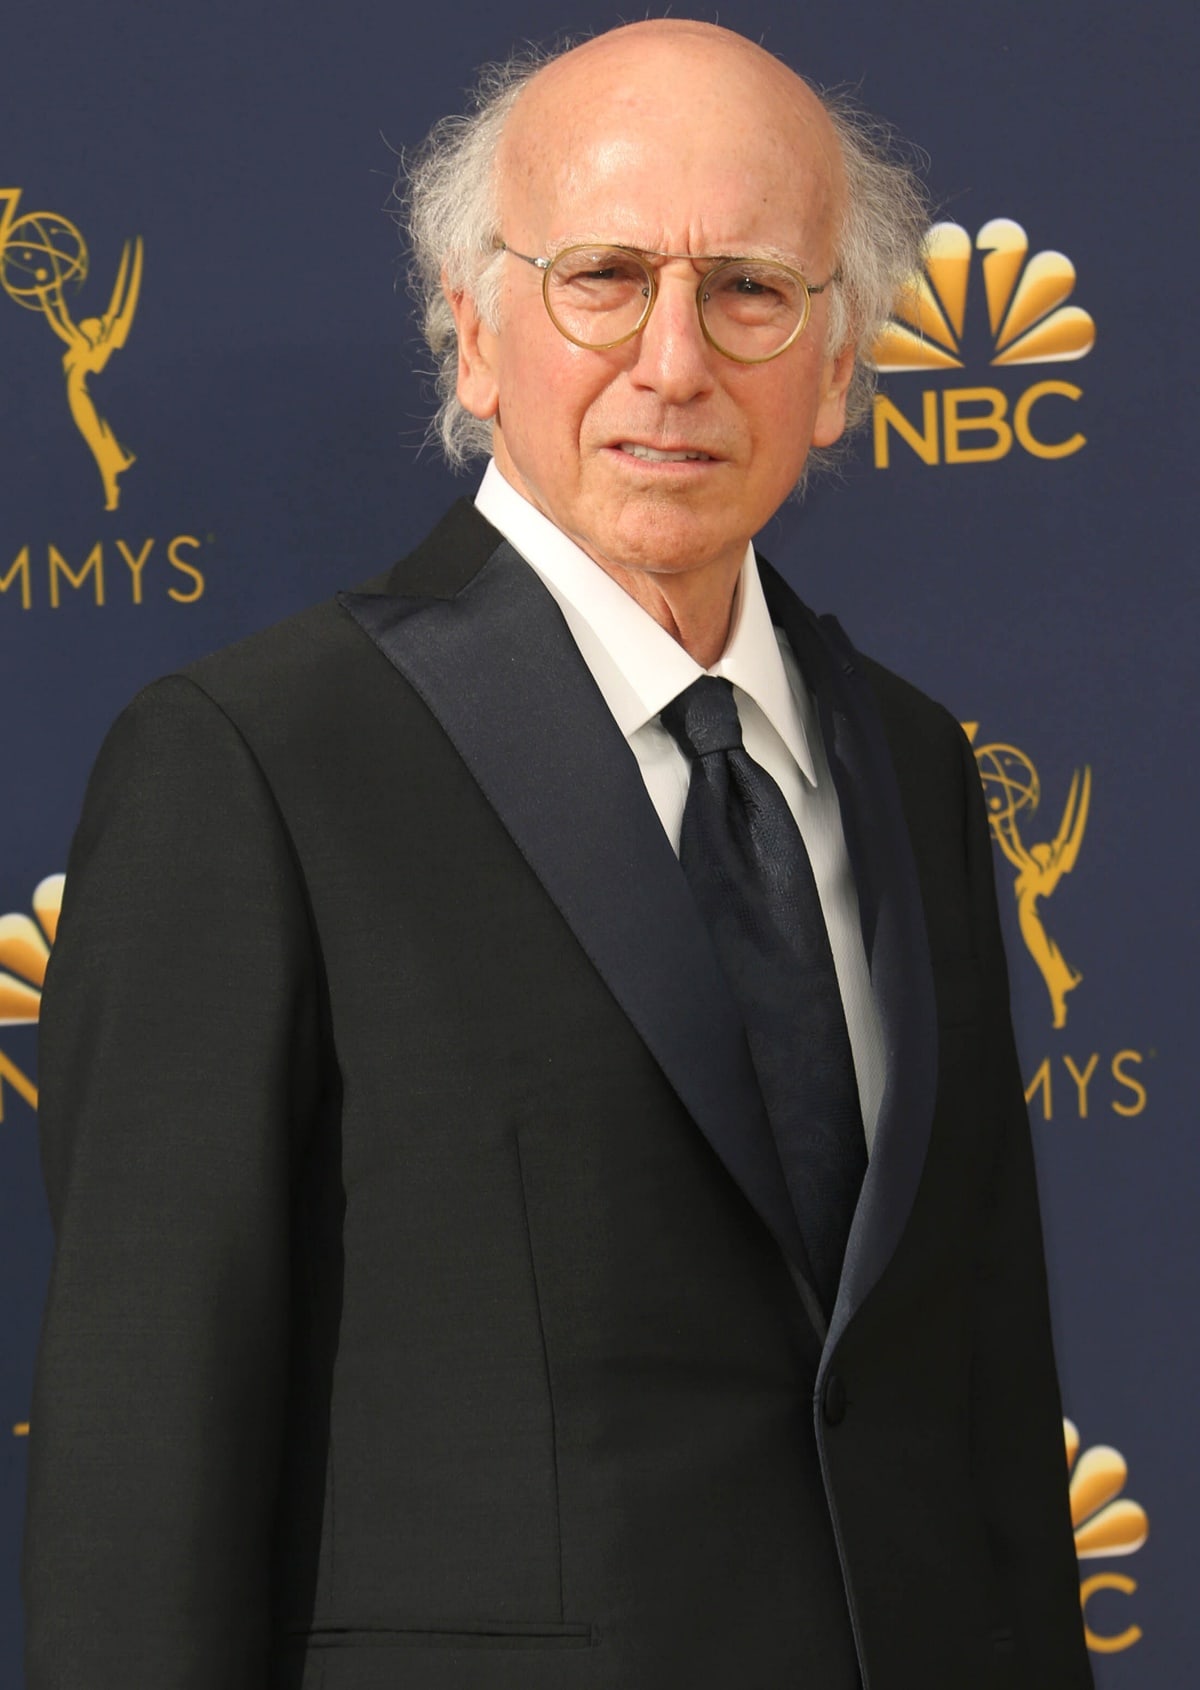 Larry David played George Steinbrenner, and he has an impressive $400 million net worth